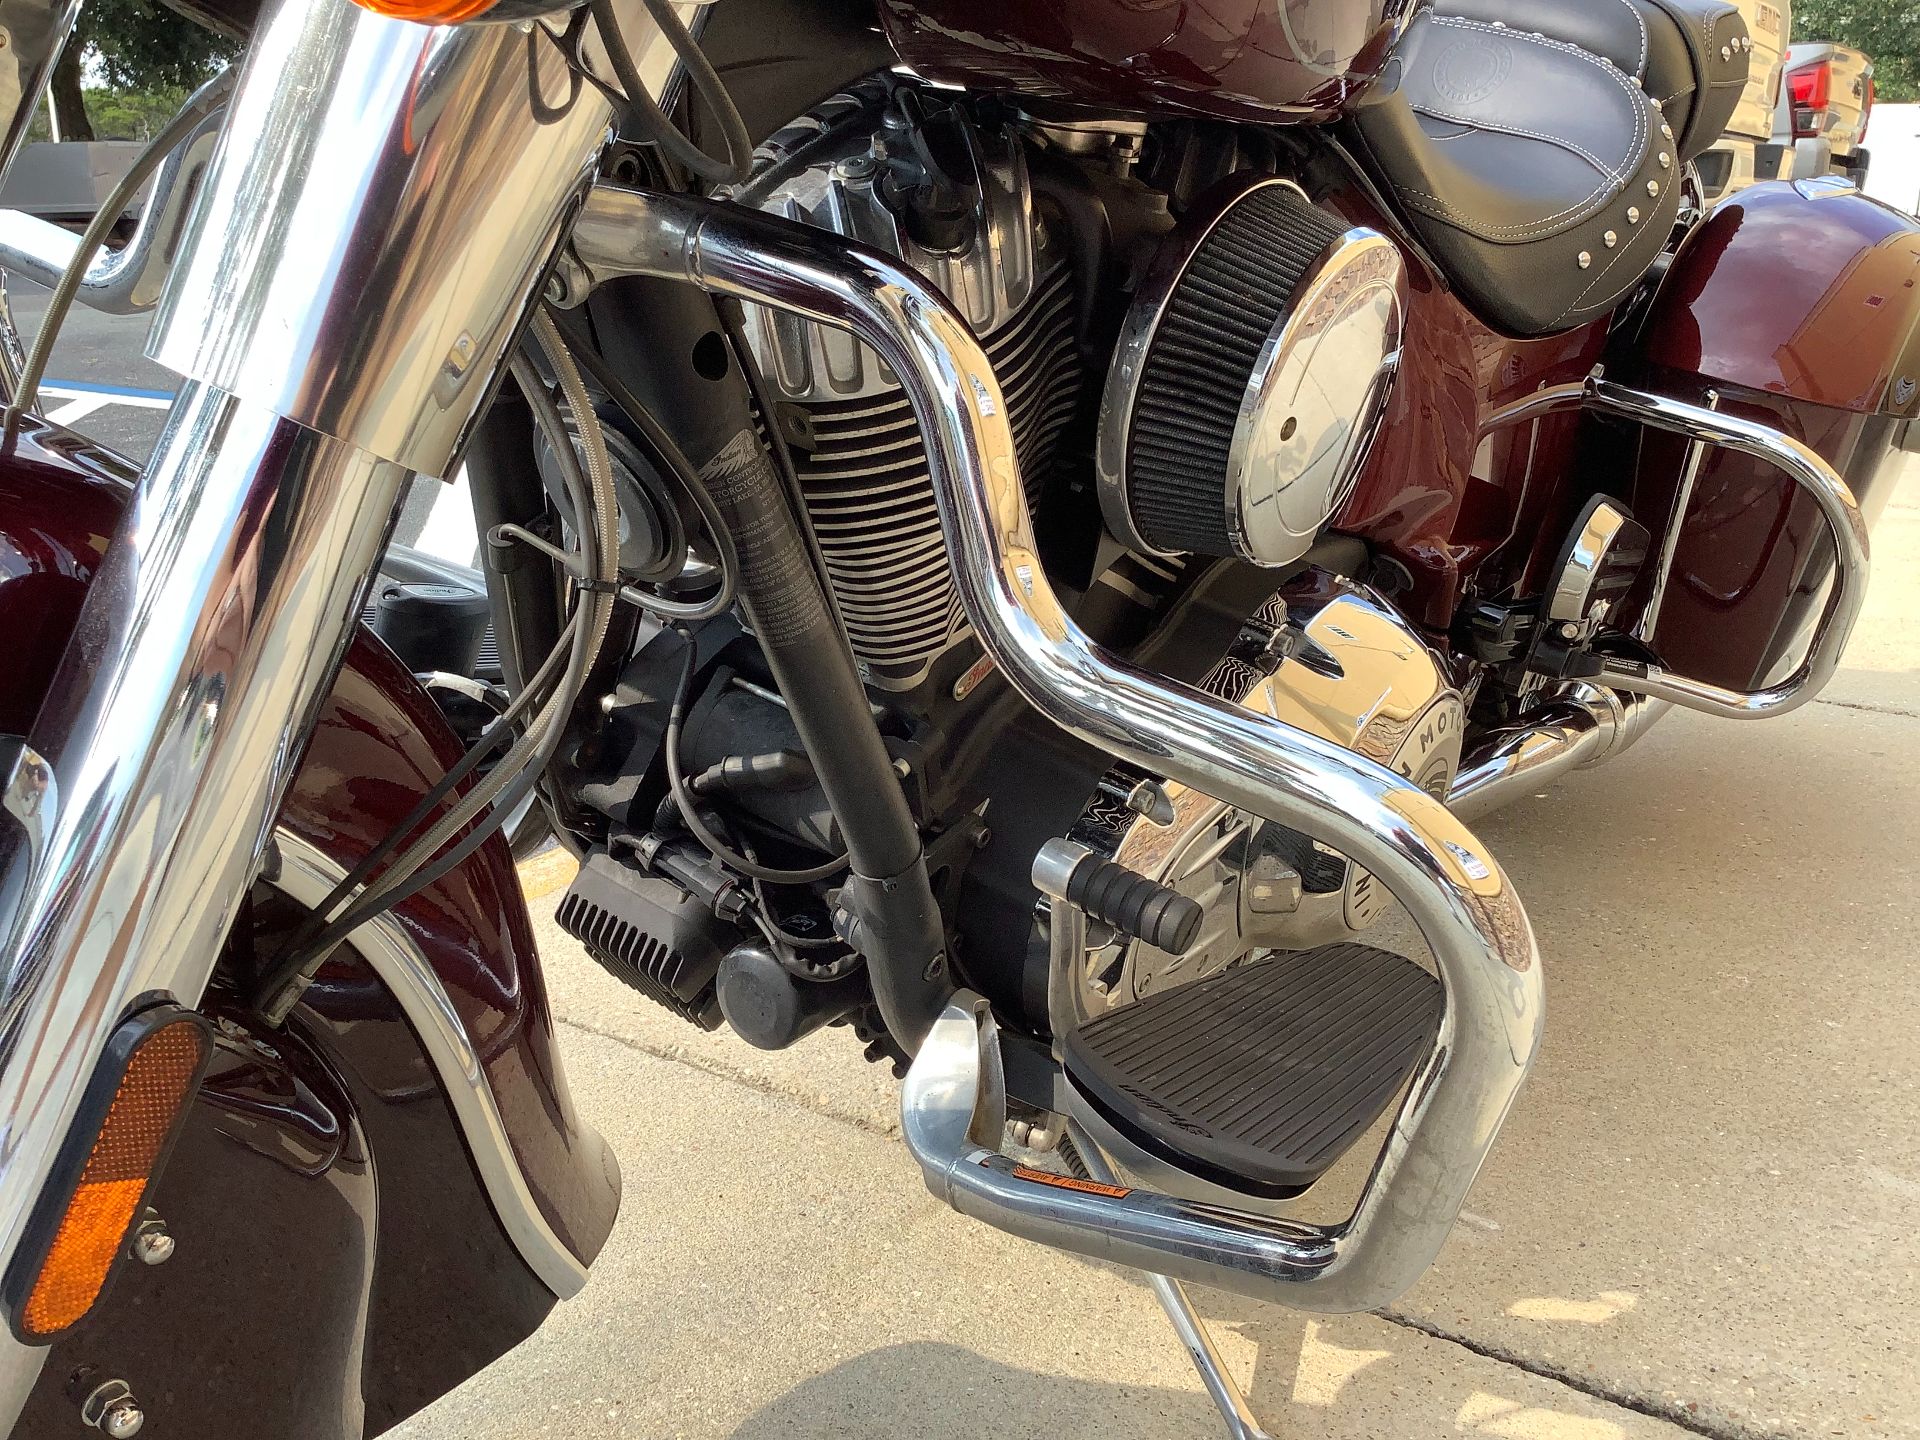 2021 Indian Motorcycle SPRINGFIELD TWO TONE in Panama City Beach, Florida - Photo 14